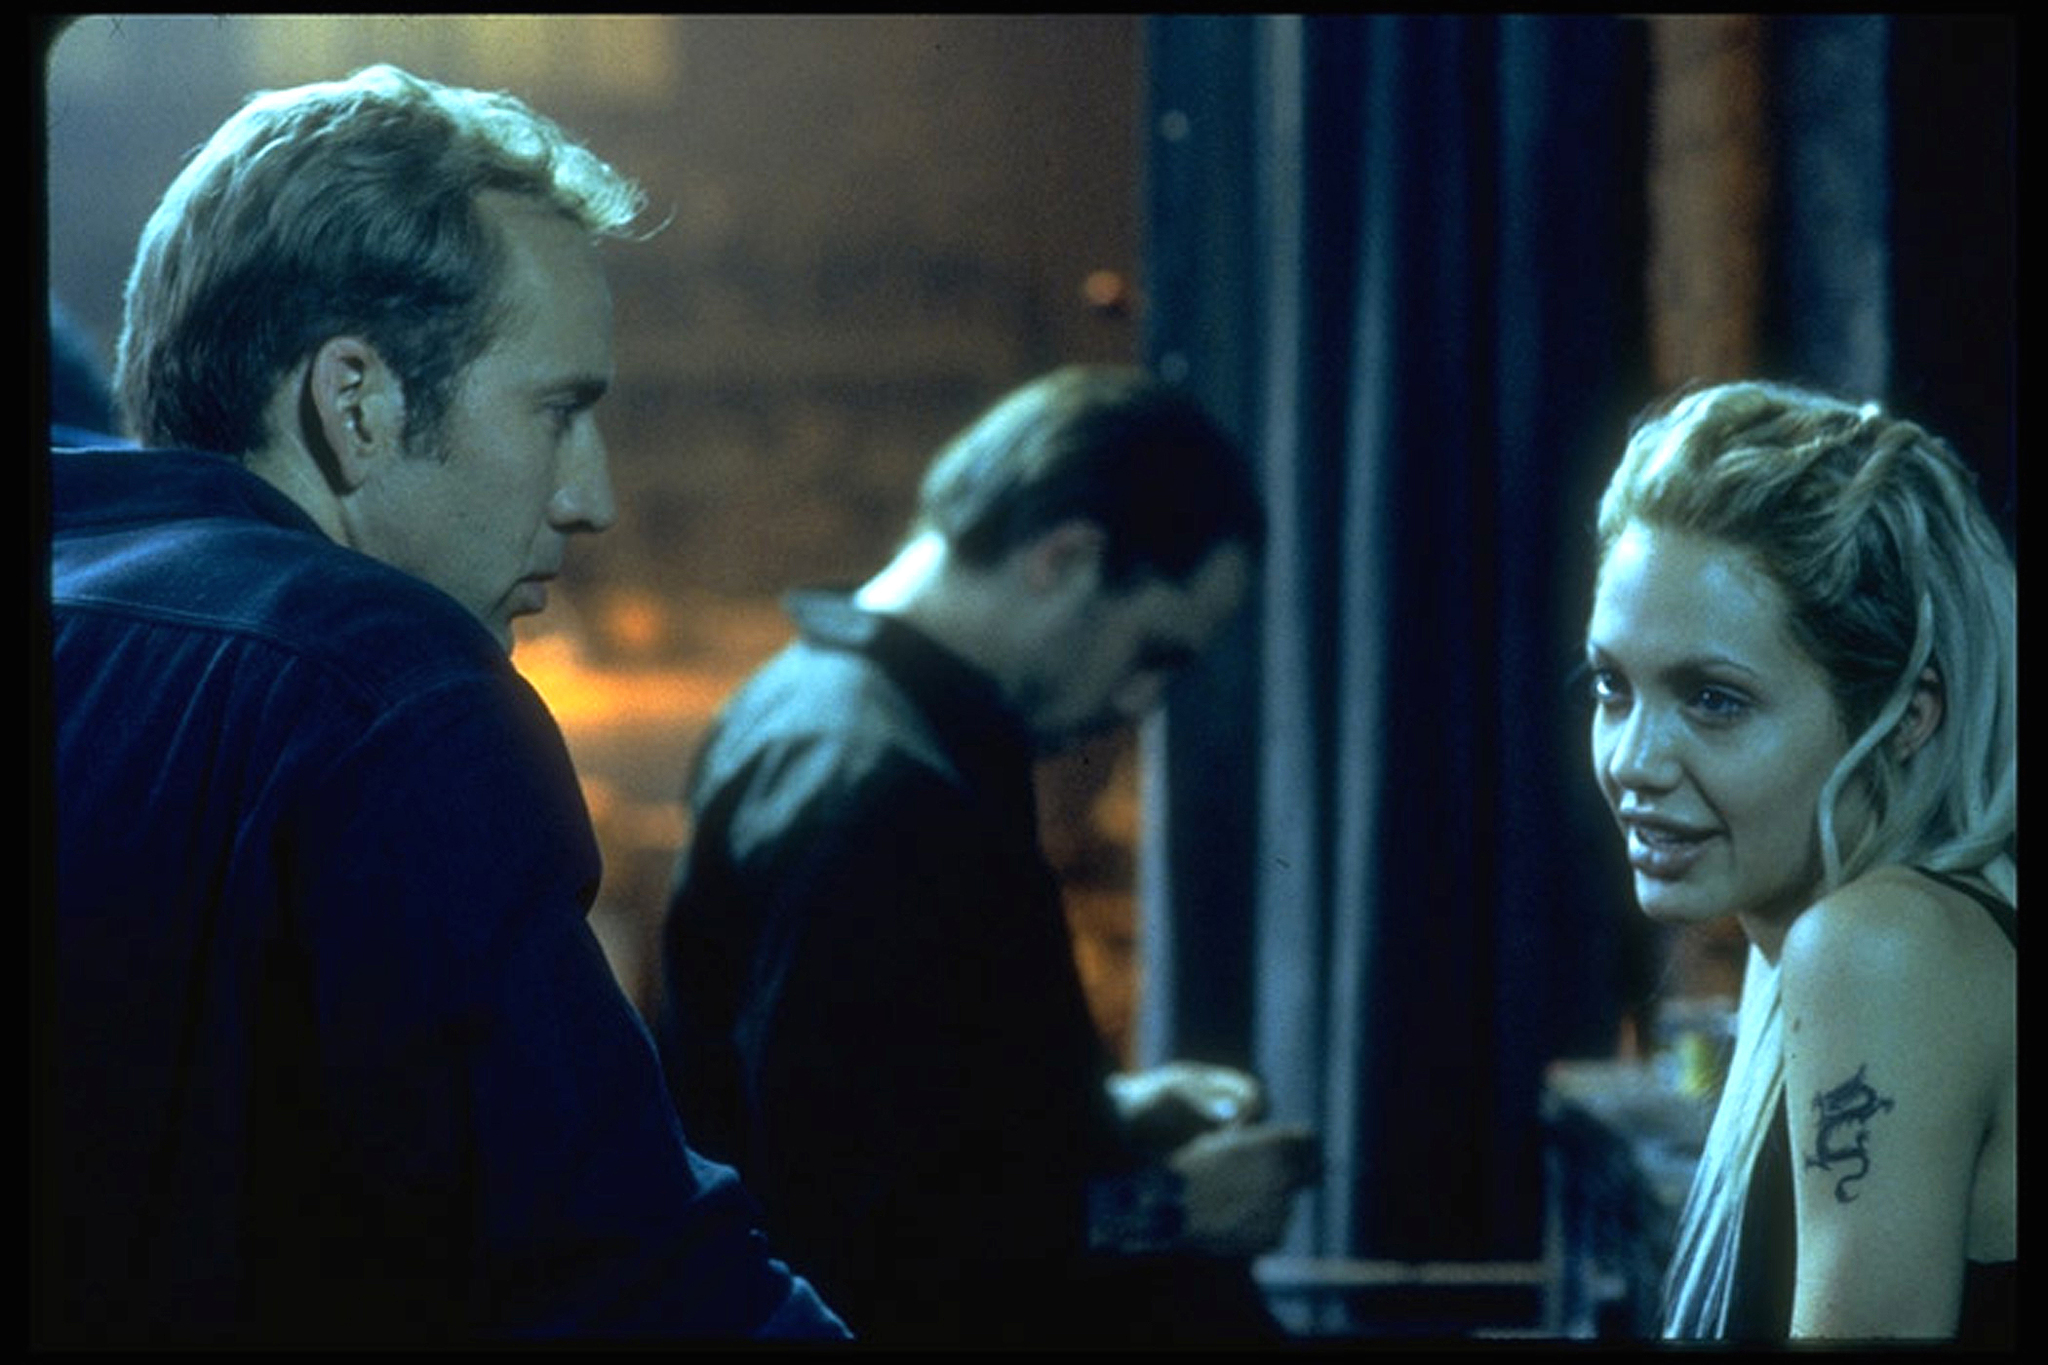 Still of Nicolas Cage and Angelina Jolie in Gone in Sixty Seconds (2000)